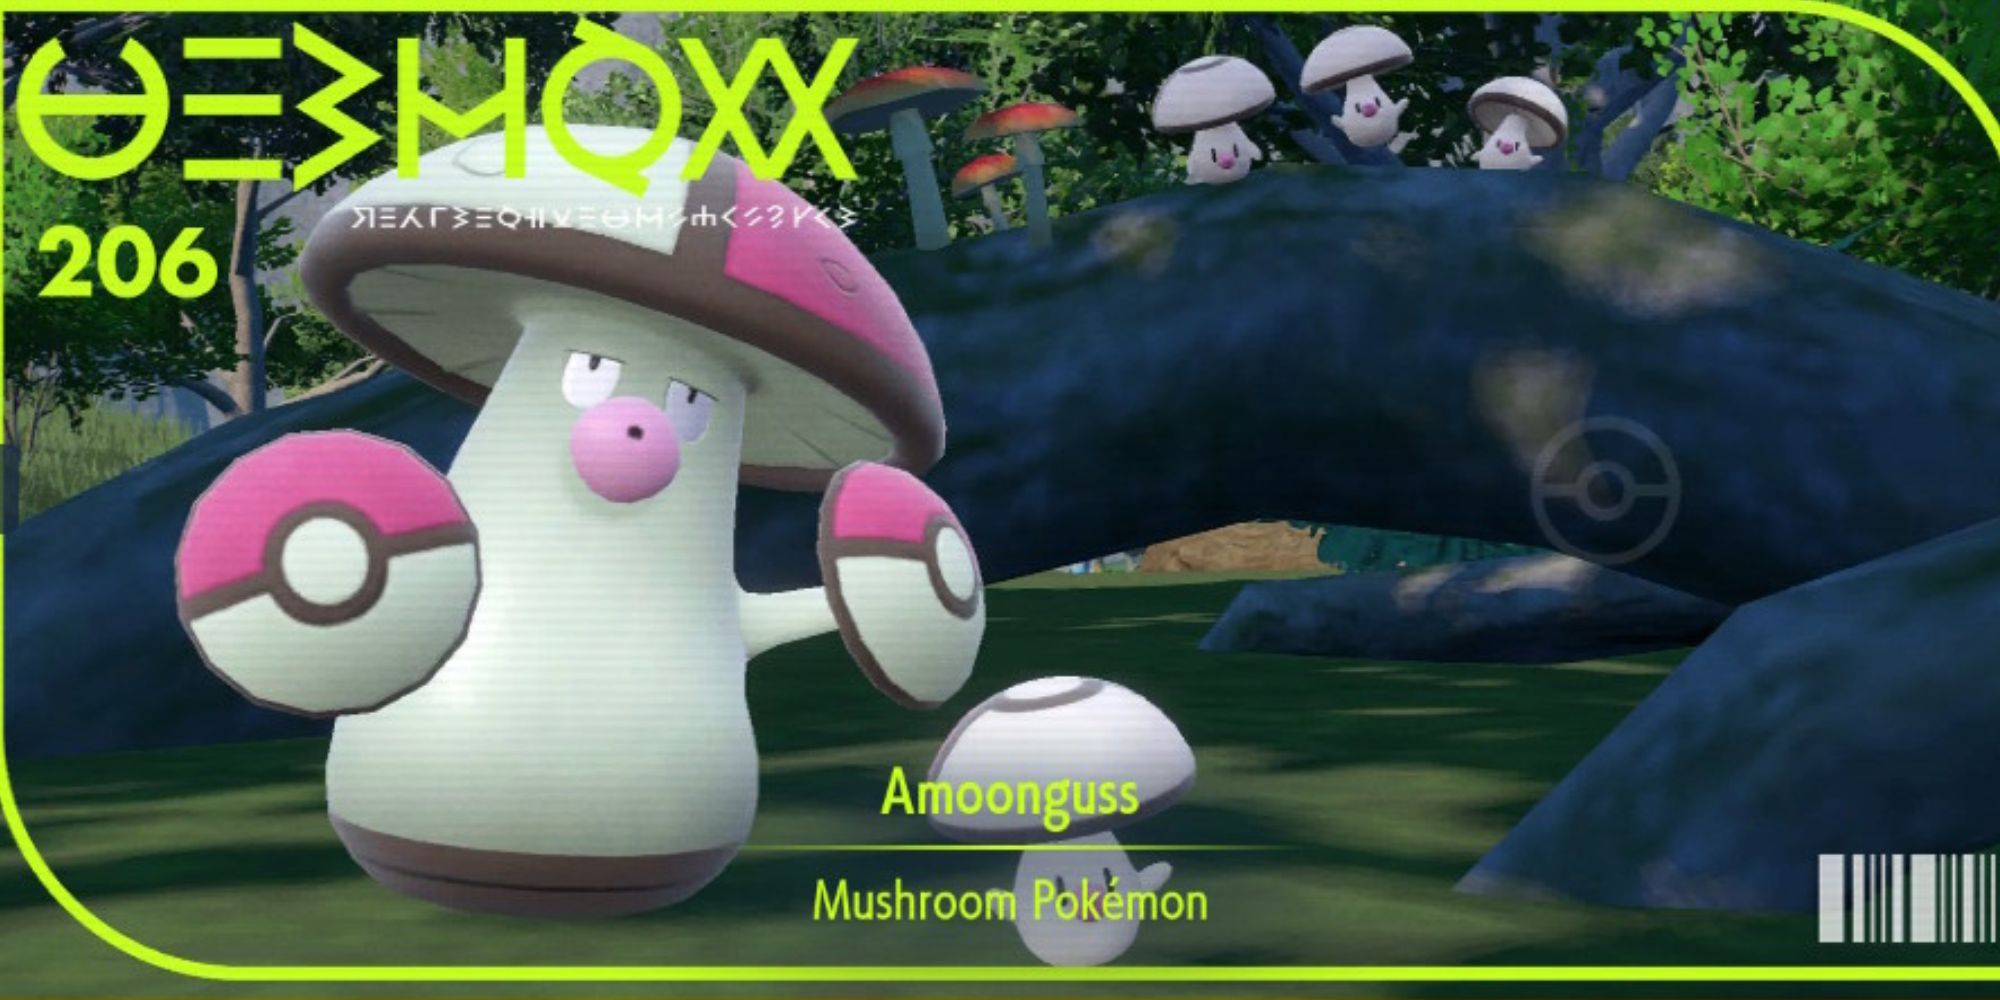 The pokedex cover image for Amoonguss in Pokemon Scarlet & Violet